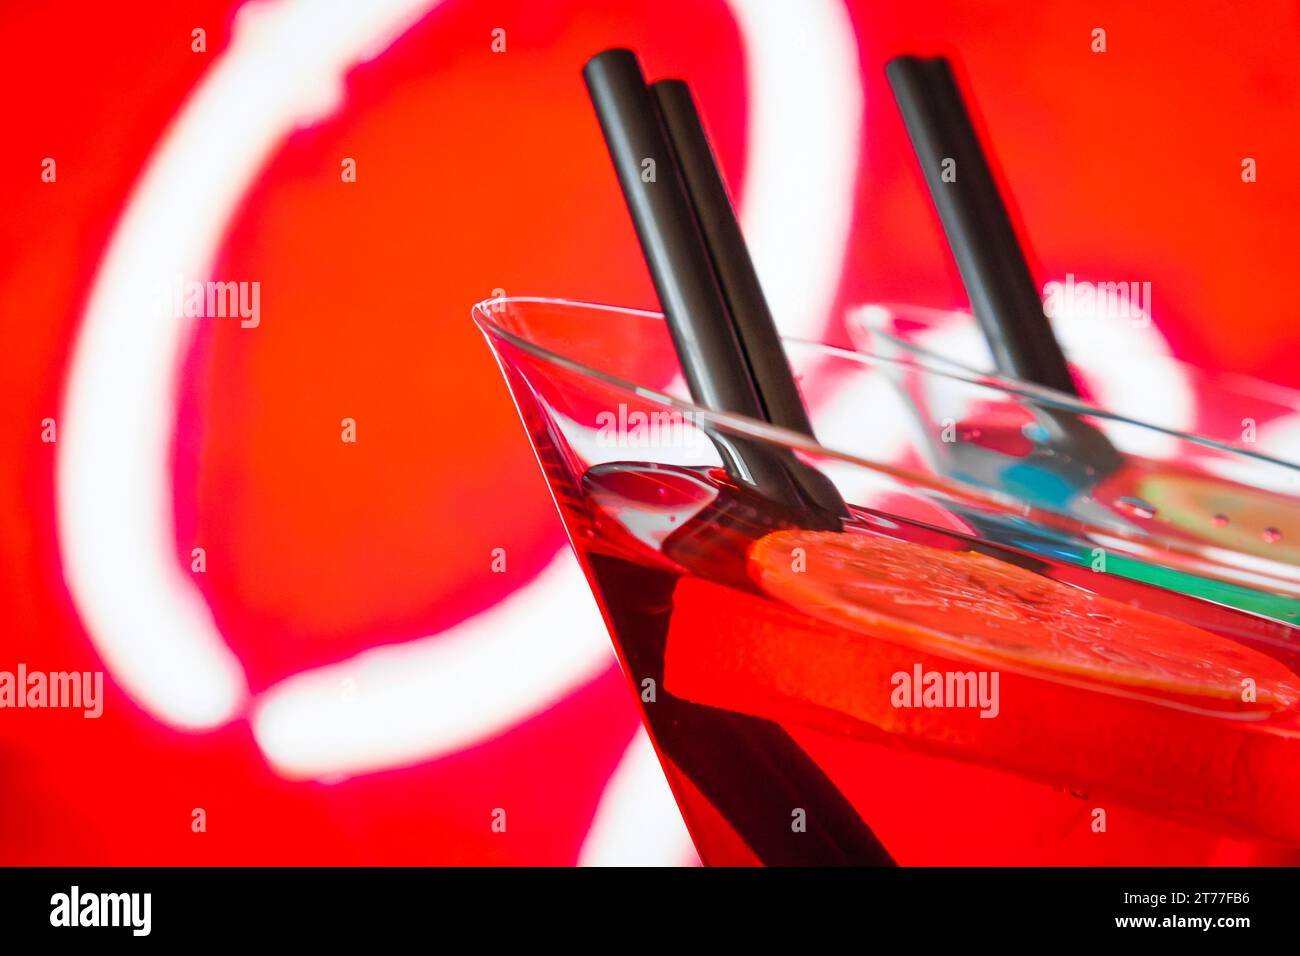 https://c8.alamy.com/comp/2T77FB6/detail-of-red-cocktail-with-neon-background-with-space-for-text-dance-disco-concept-2T77FB6.jpg